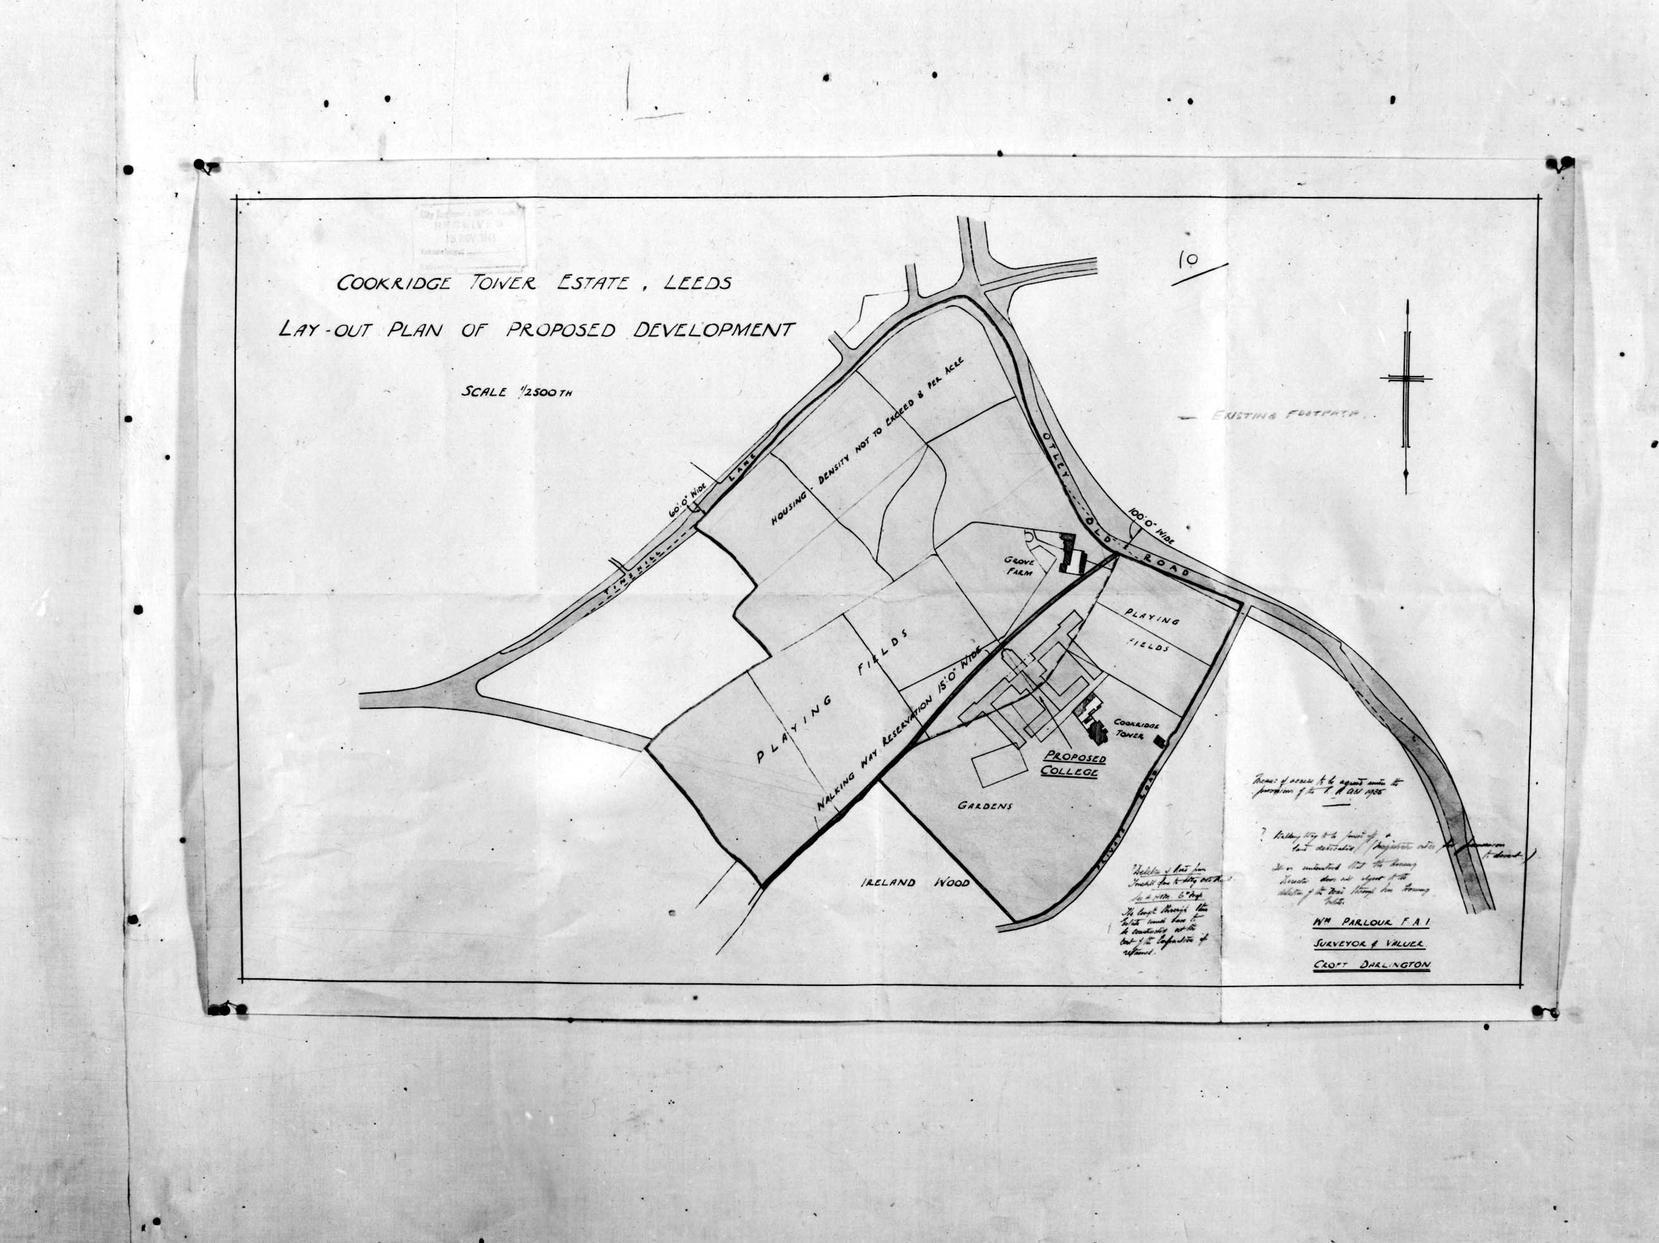 Layout of a proposed development west of Otley Old Road and South of Tinshill Lane in November 1943. This area is now occupied by roads with the prefixes Grove and Haven.